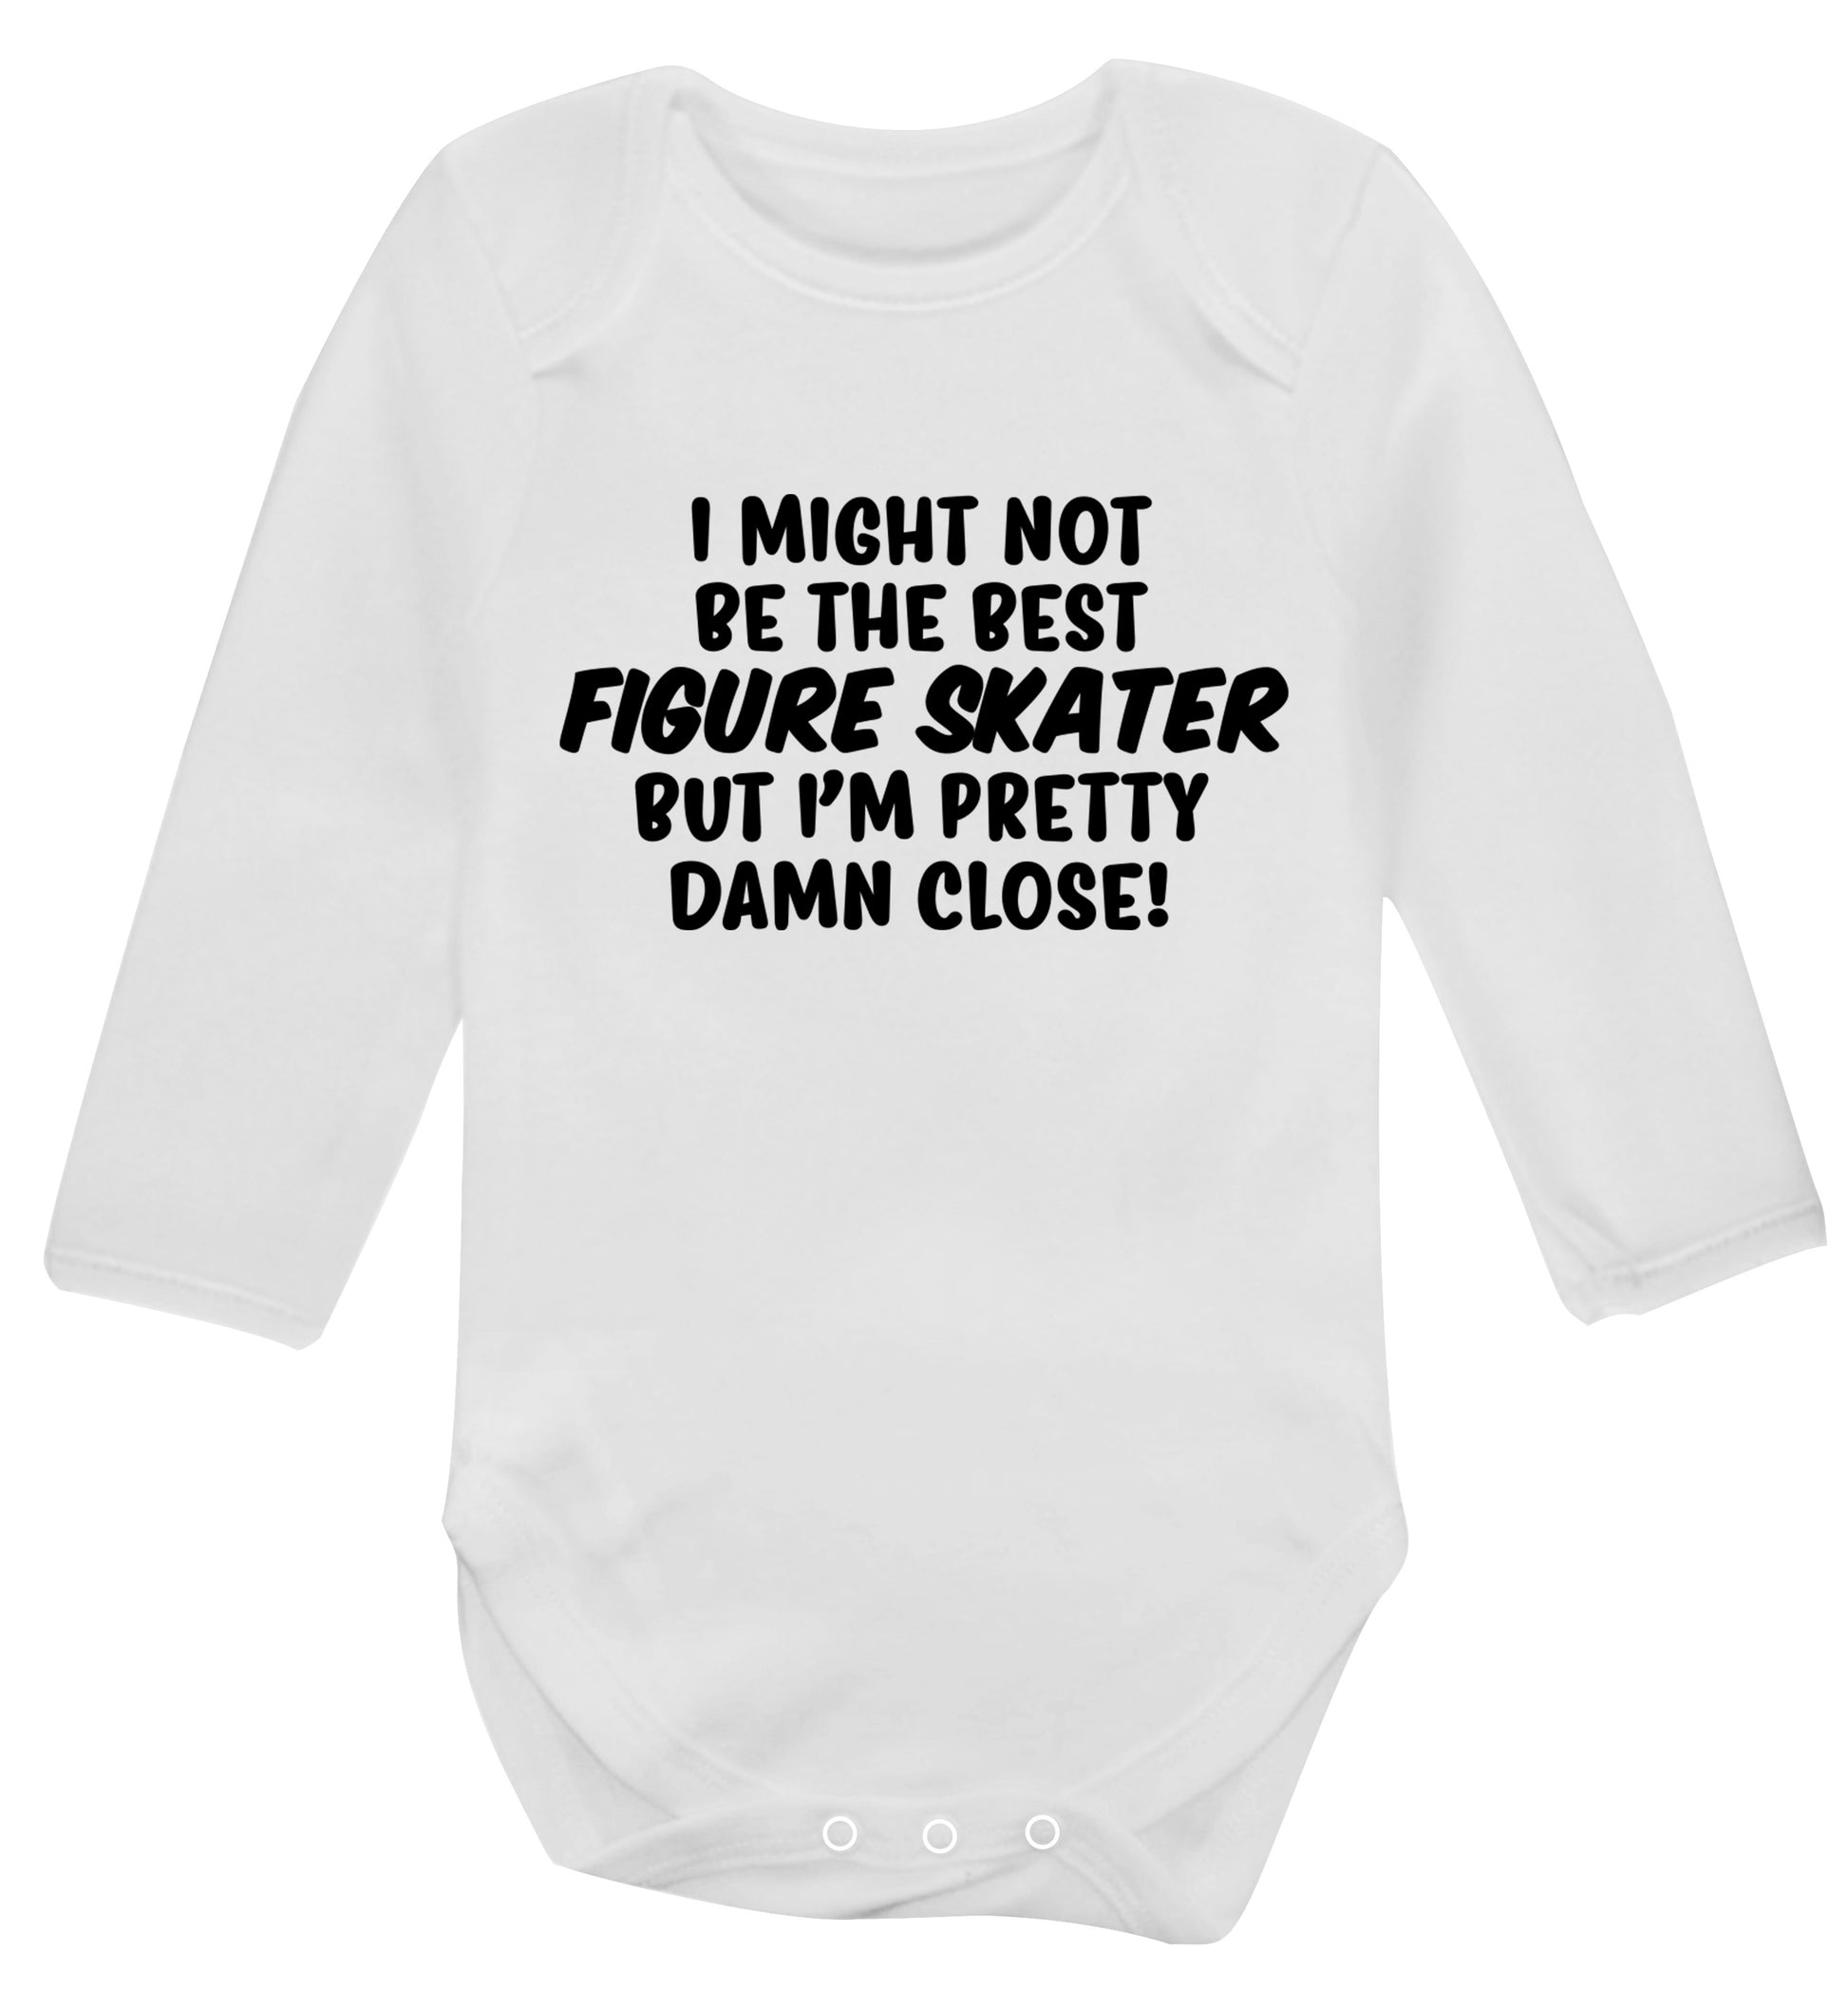 I might not be the best figure skater but I'm pretty damn close! Baby Vest long sleeved white 6-12 months